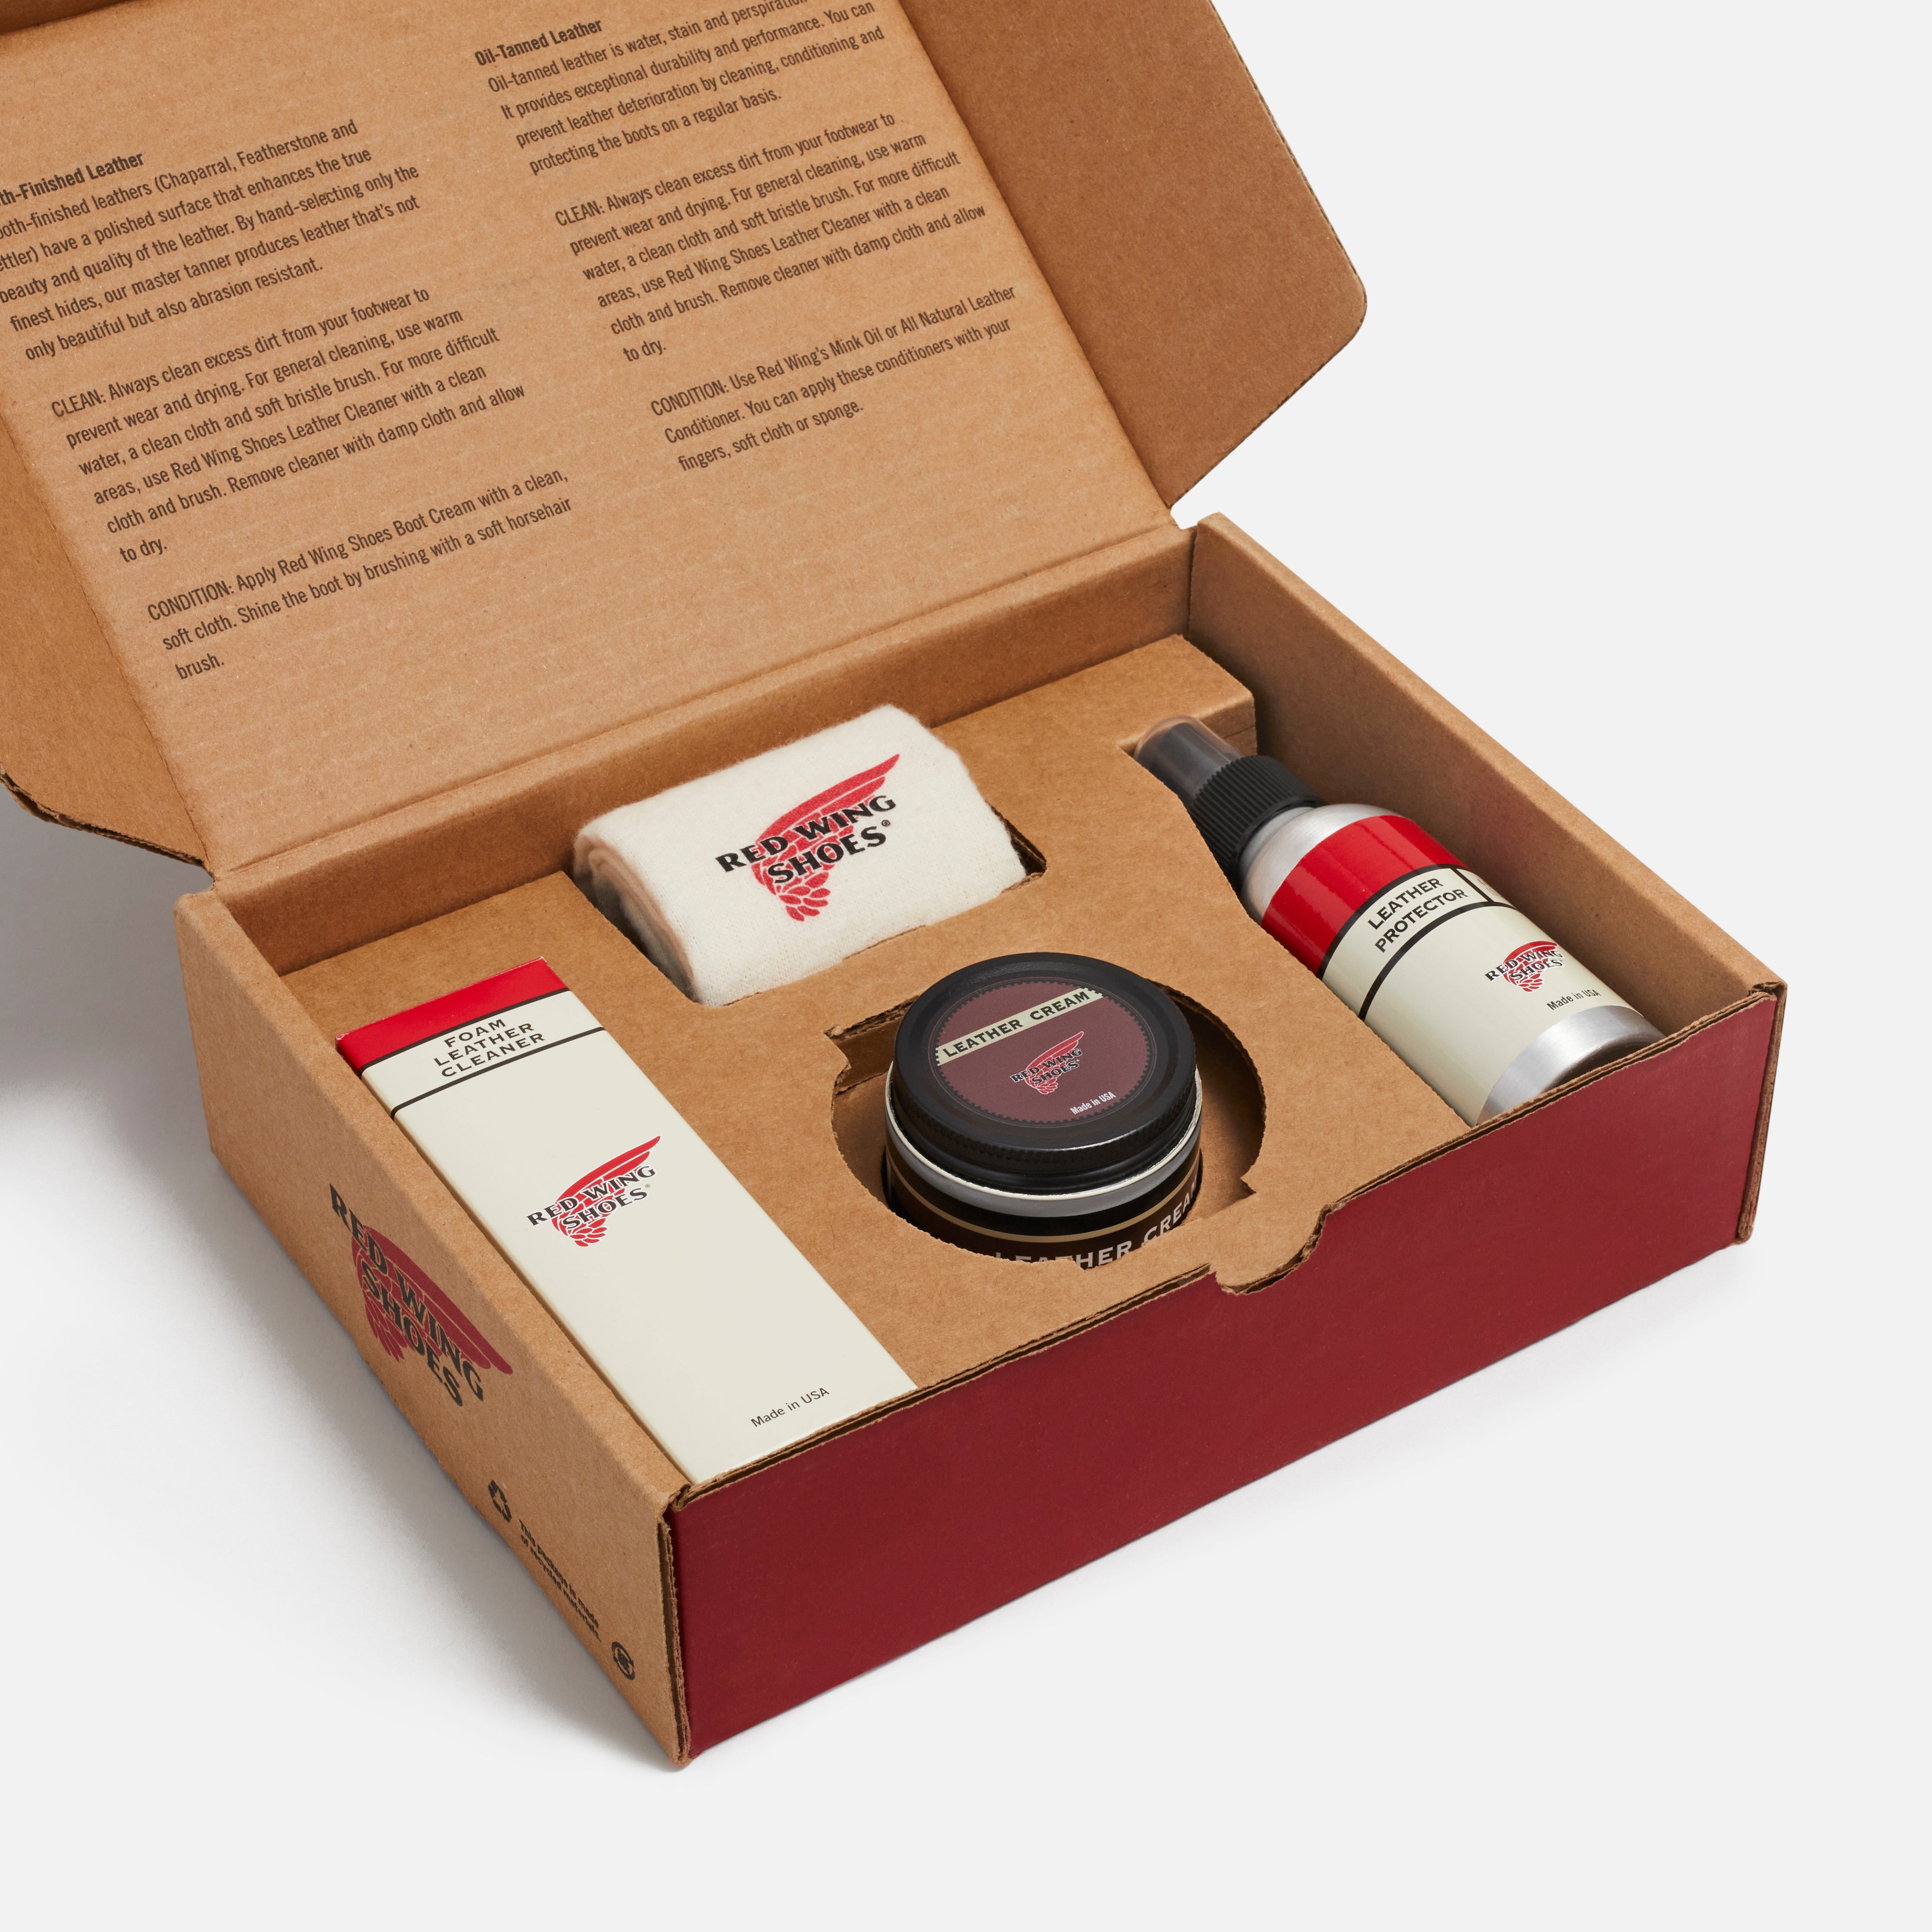 Red Wing Care Kit - Smooth Finish Leather 